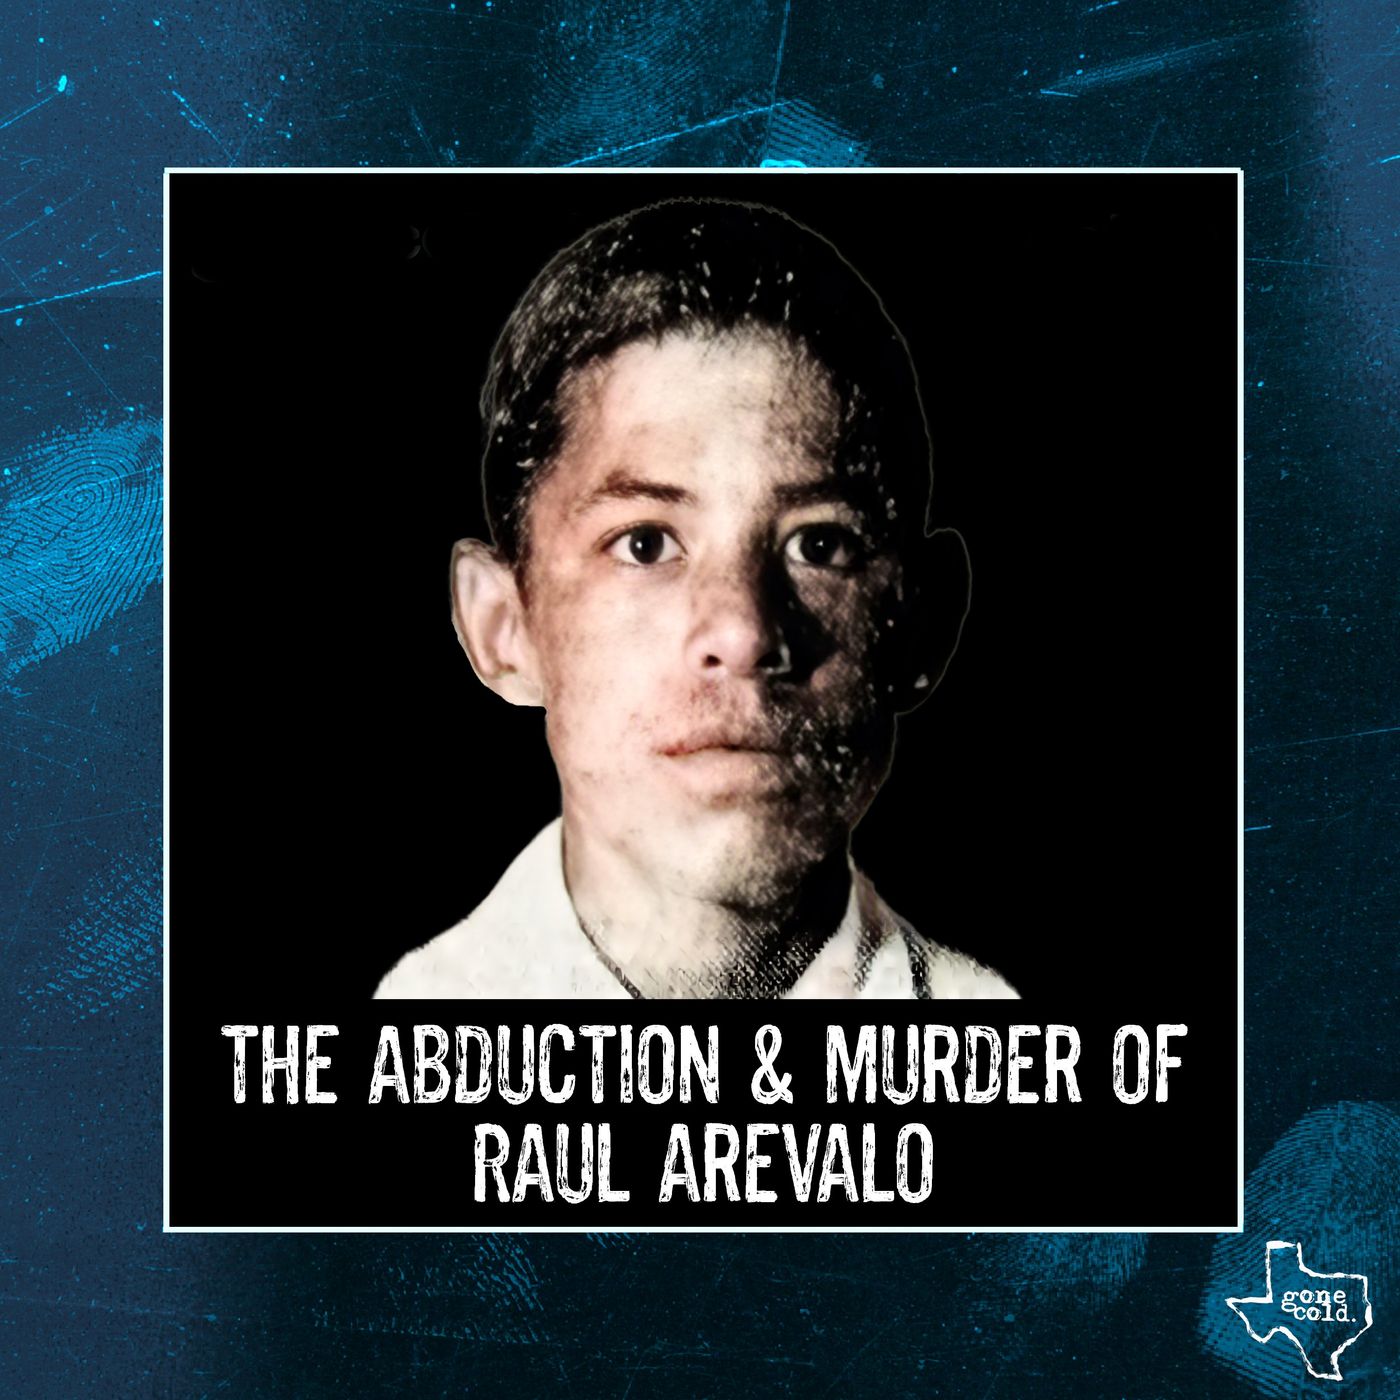 The Abduction & Murder of Raul Arevalo